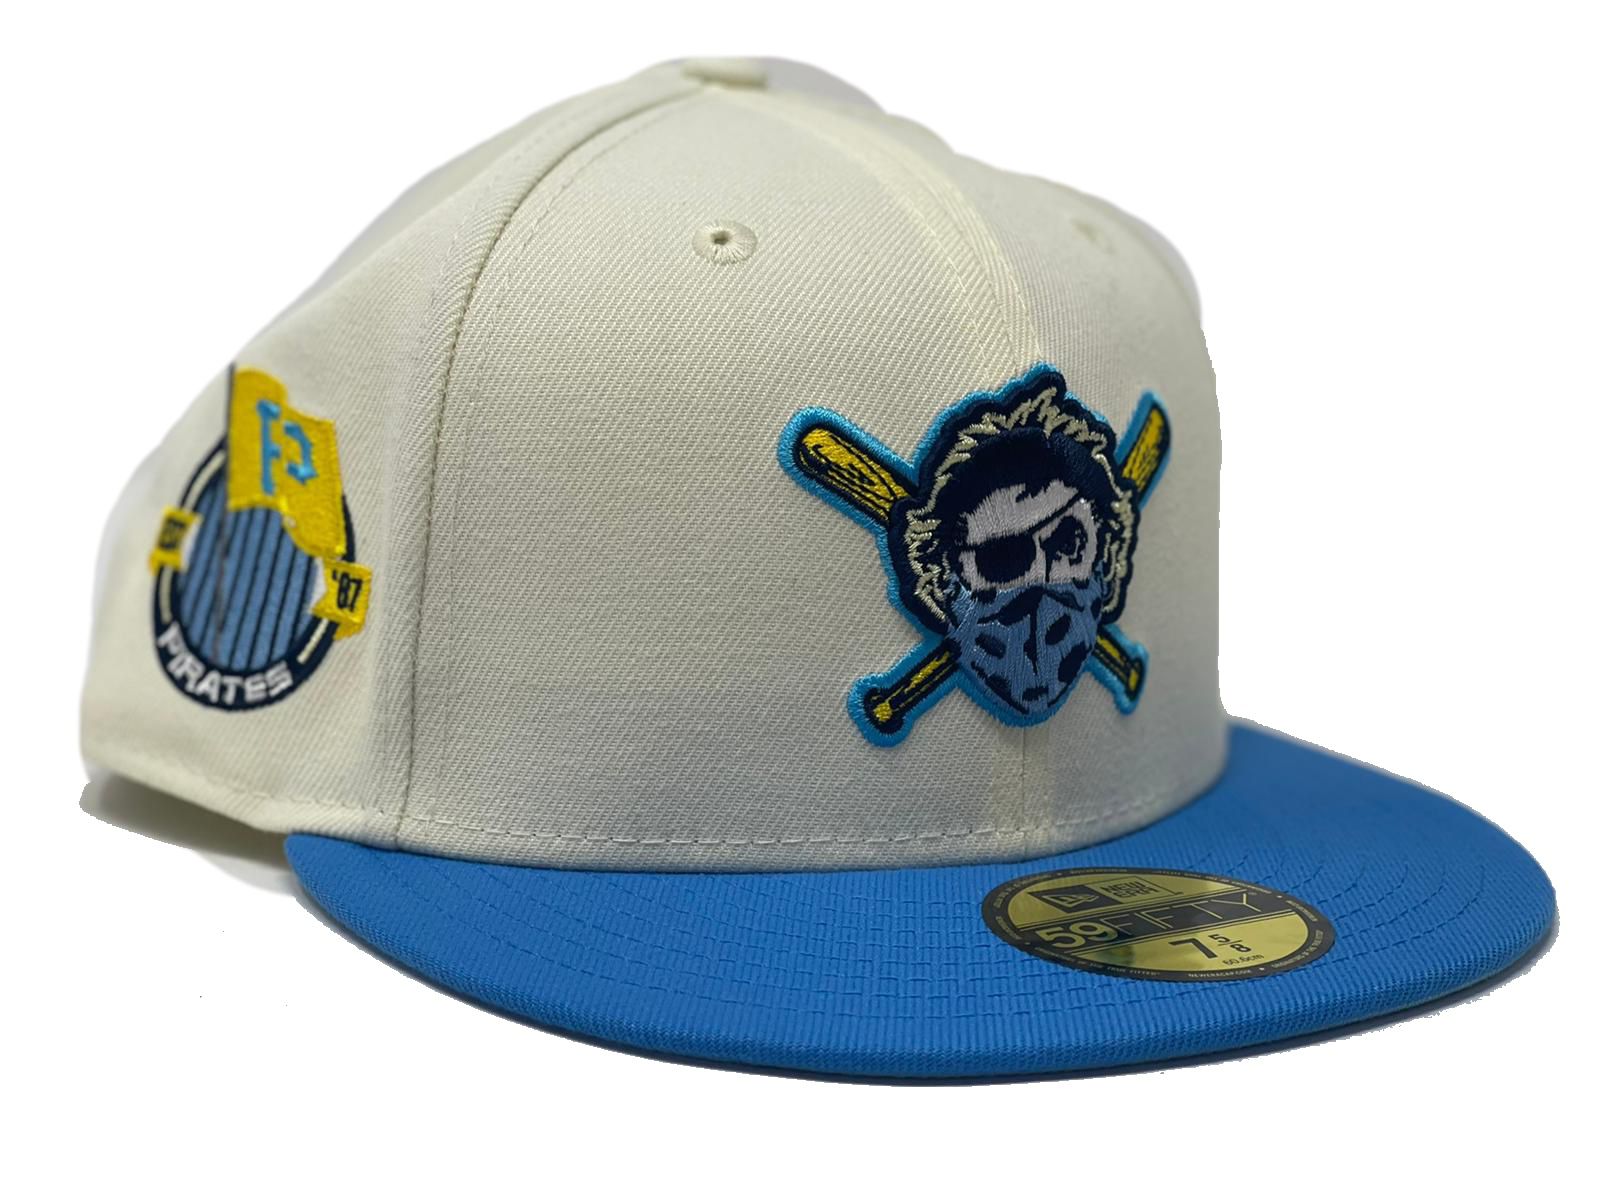 EcapCity Pittsburgh Pirates Fitted Hat Size 7 1/8 GITD. EcapCity Limited  Release Sold out White Upper Blue Brim Royal blue UV 5950 New Era Brand New